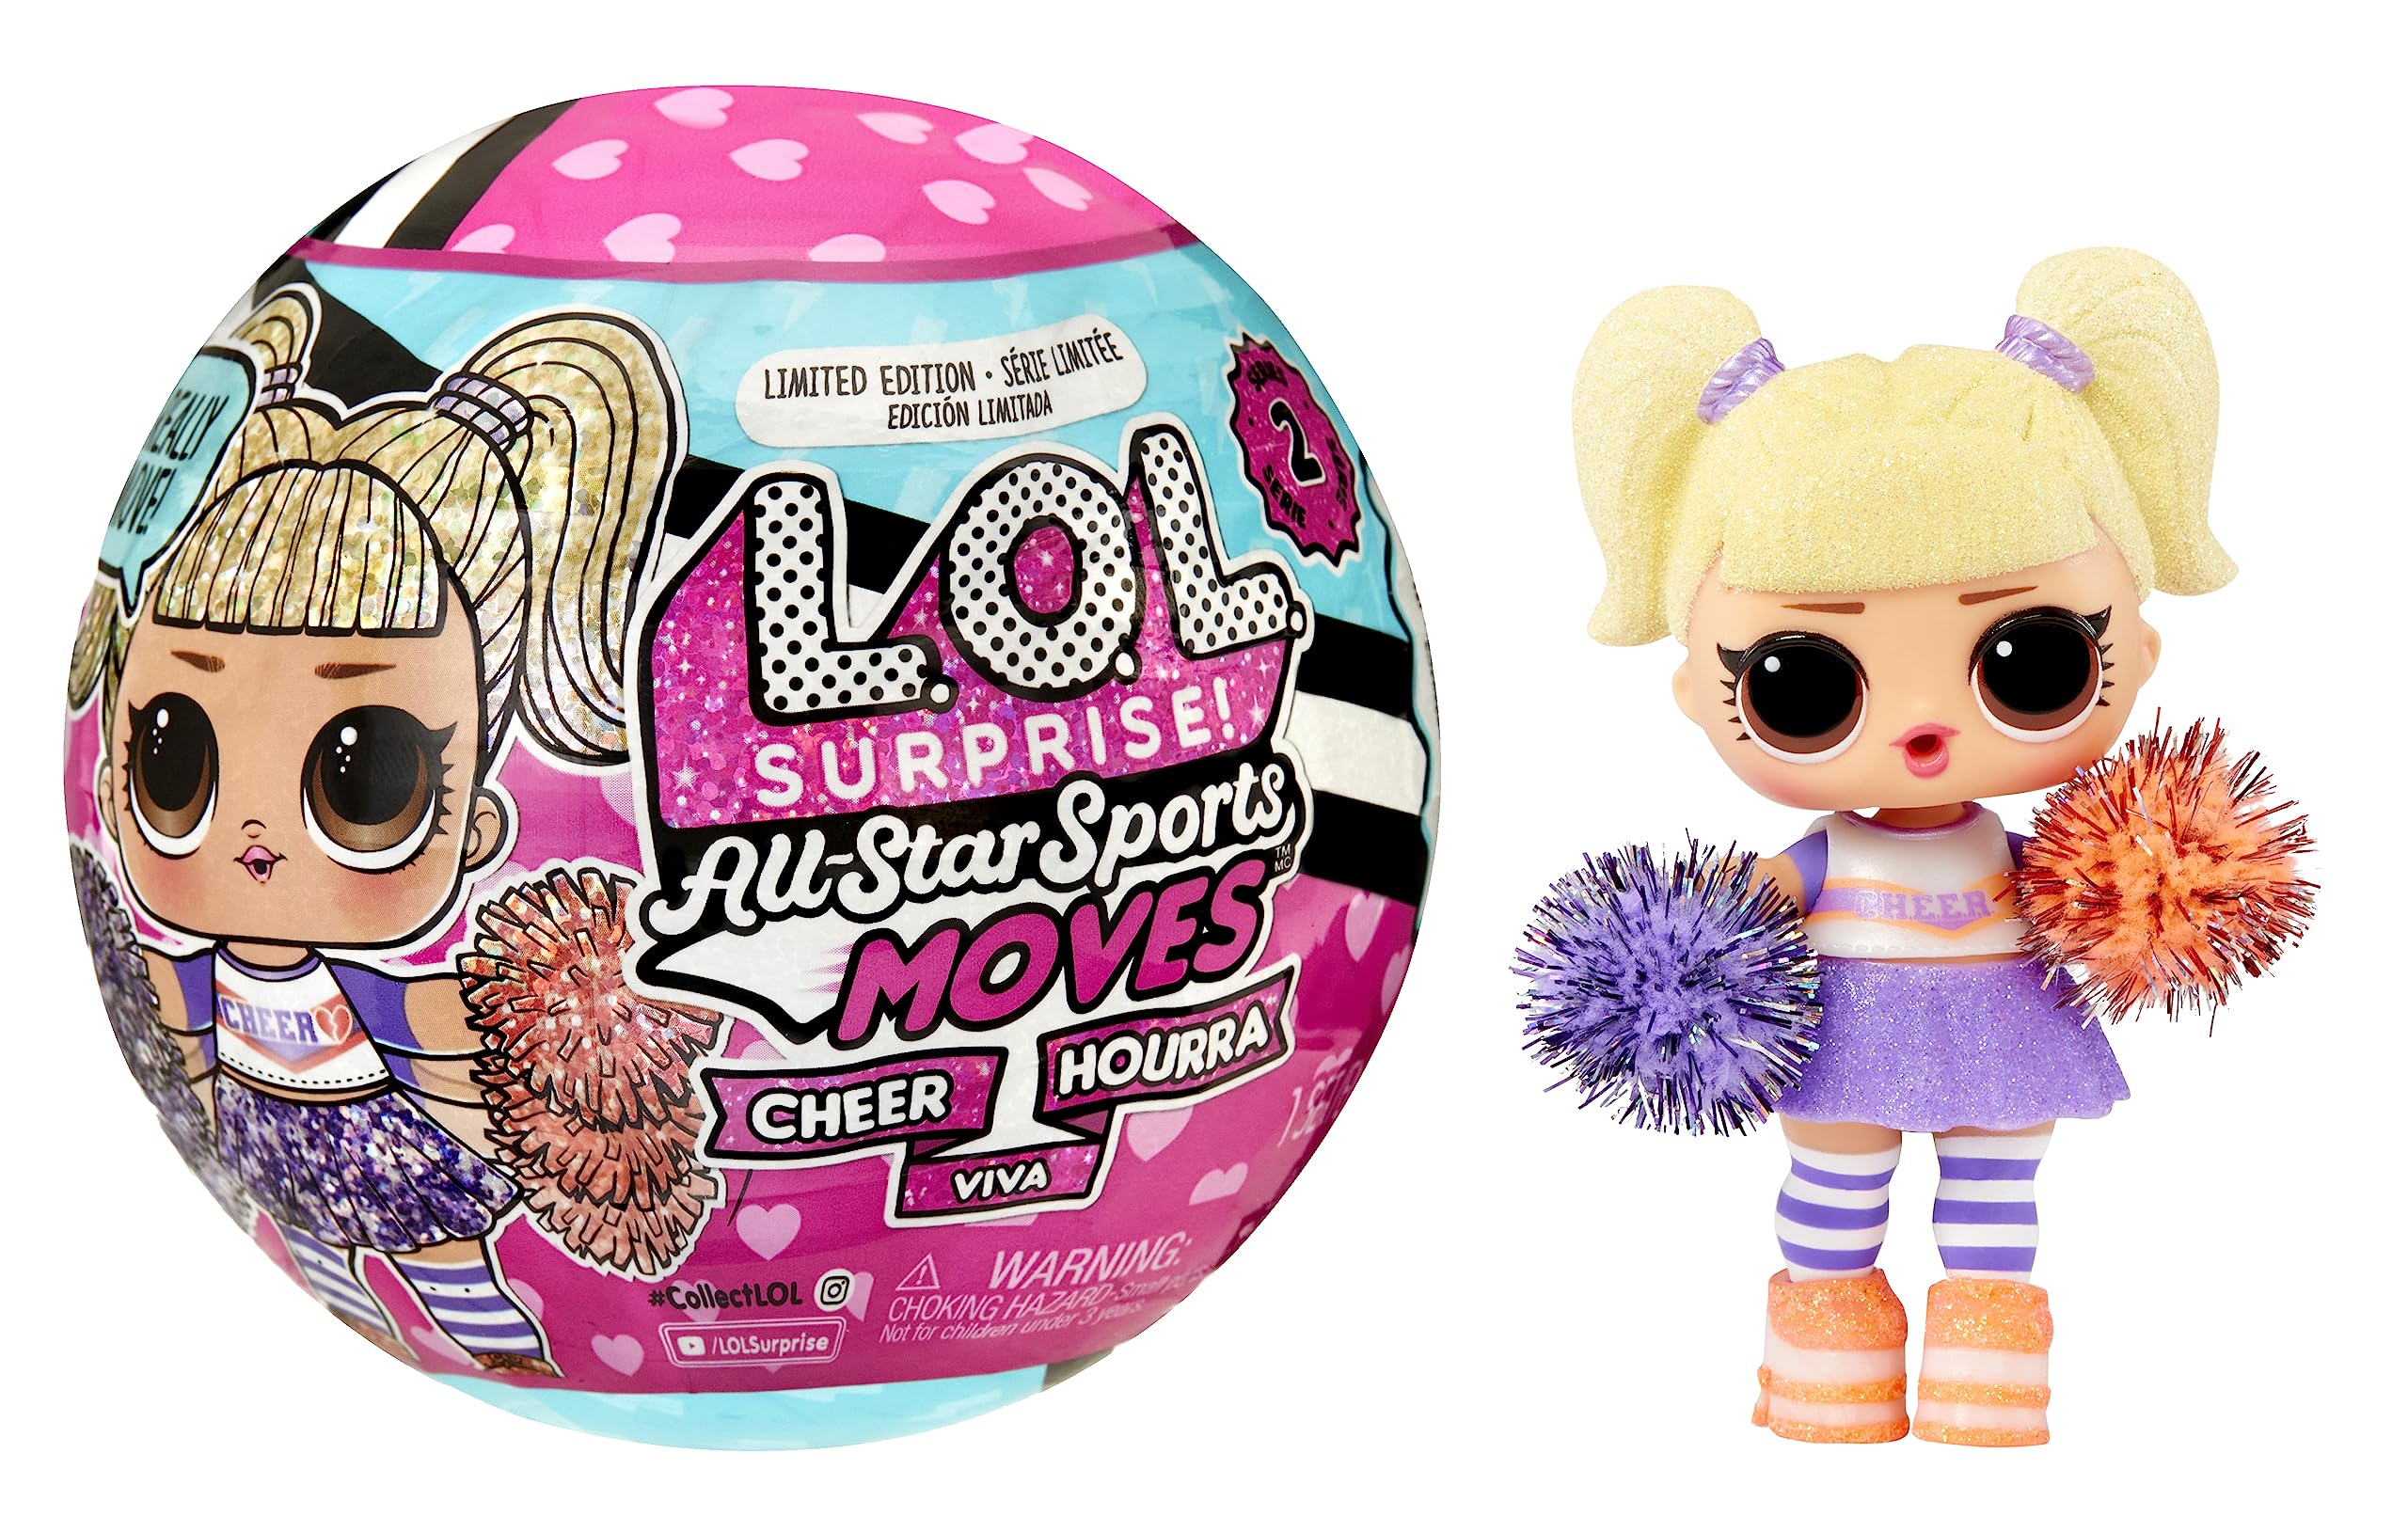 LOL Surprise All Star Sports Moves - Cheer- Surprise Doll, Sports Theme, Cheerleading Dolls, Mix and Match Outfits, Shoes, Accessories, Limited Edition Doll, Collectible Doll - Gift for Girls Age 4+